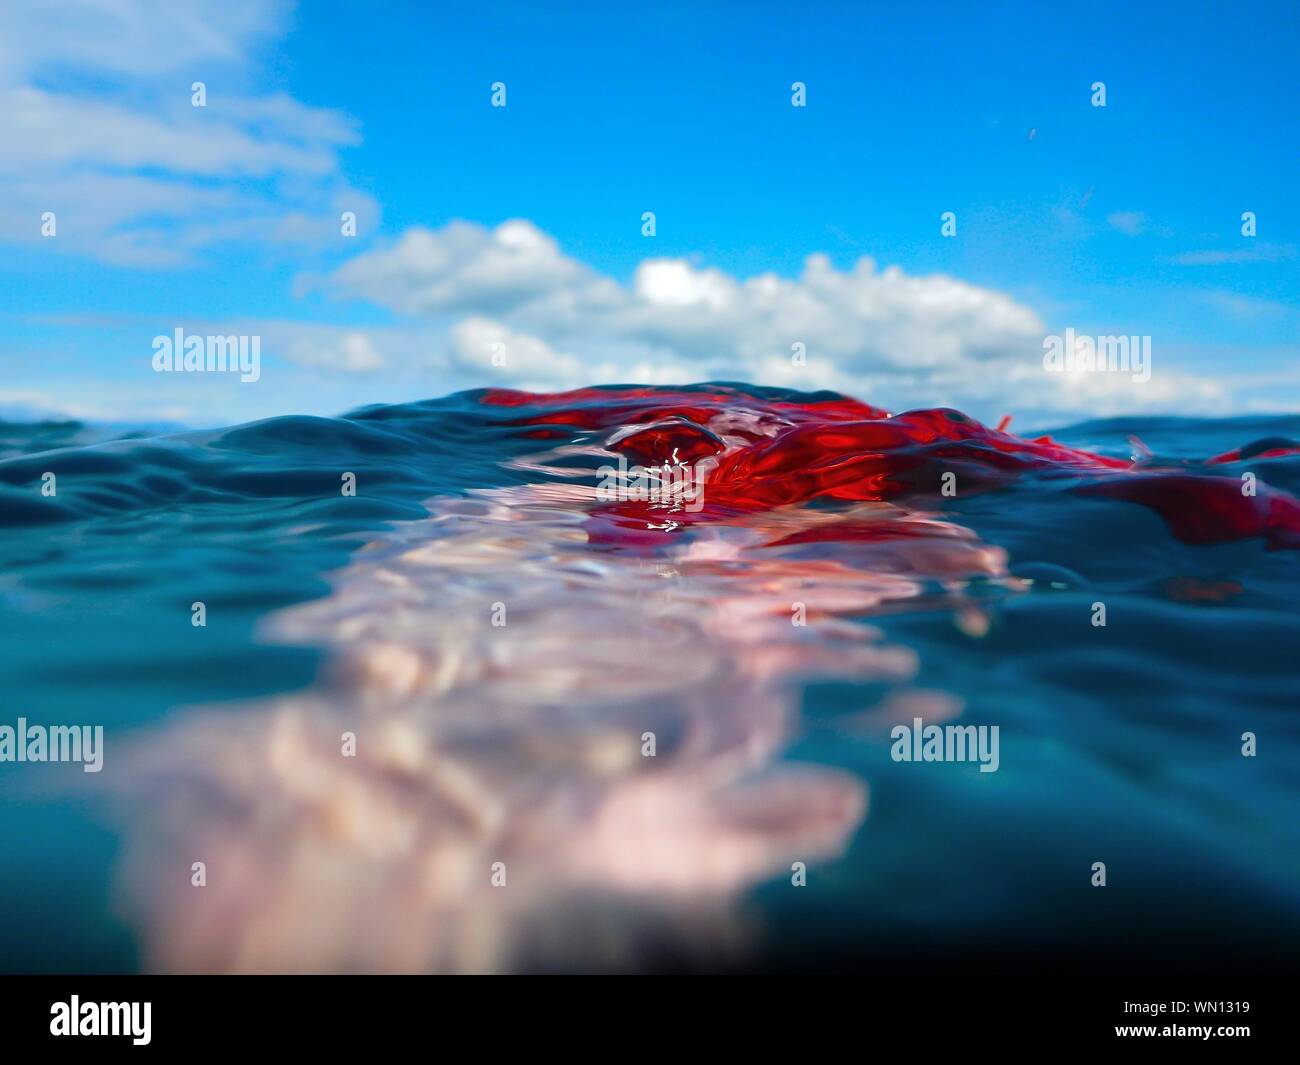 Water Surface Level Of Sea With Red Fabric Against Sky Stock Photo